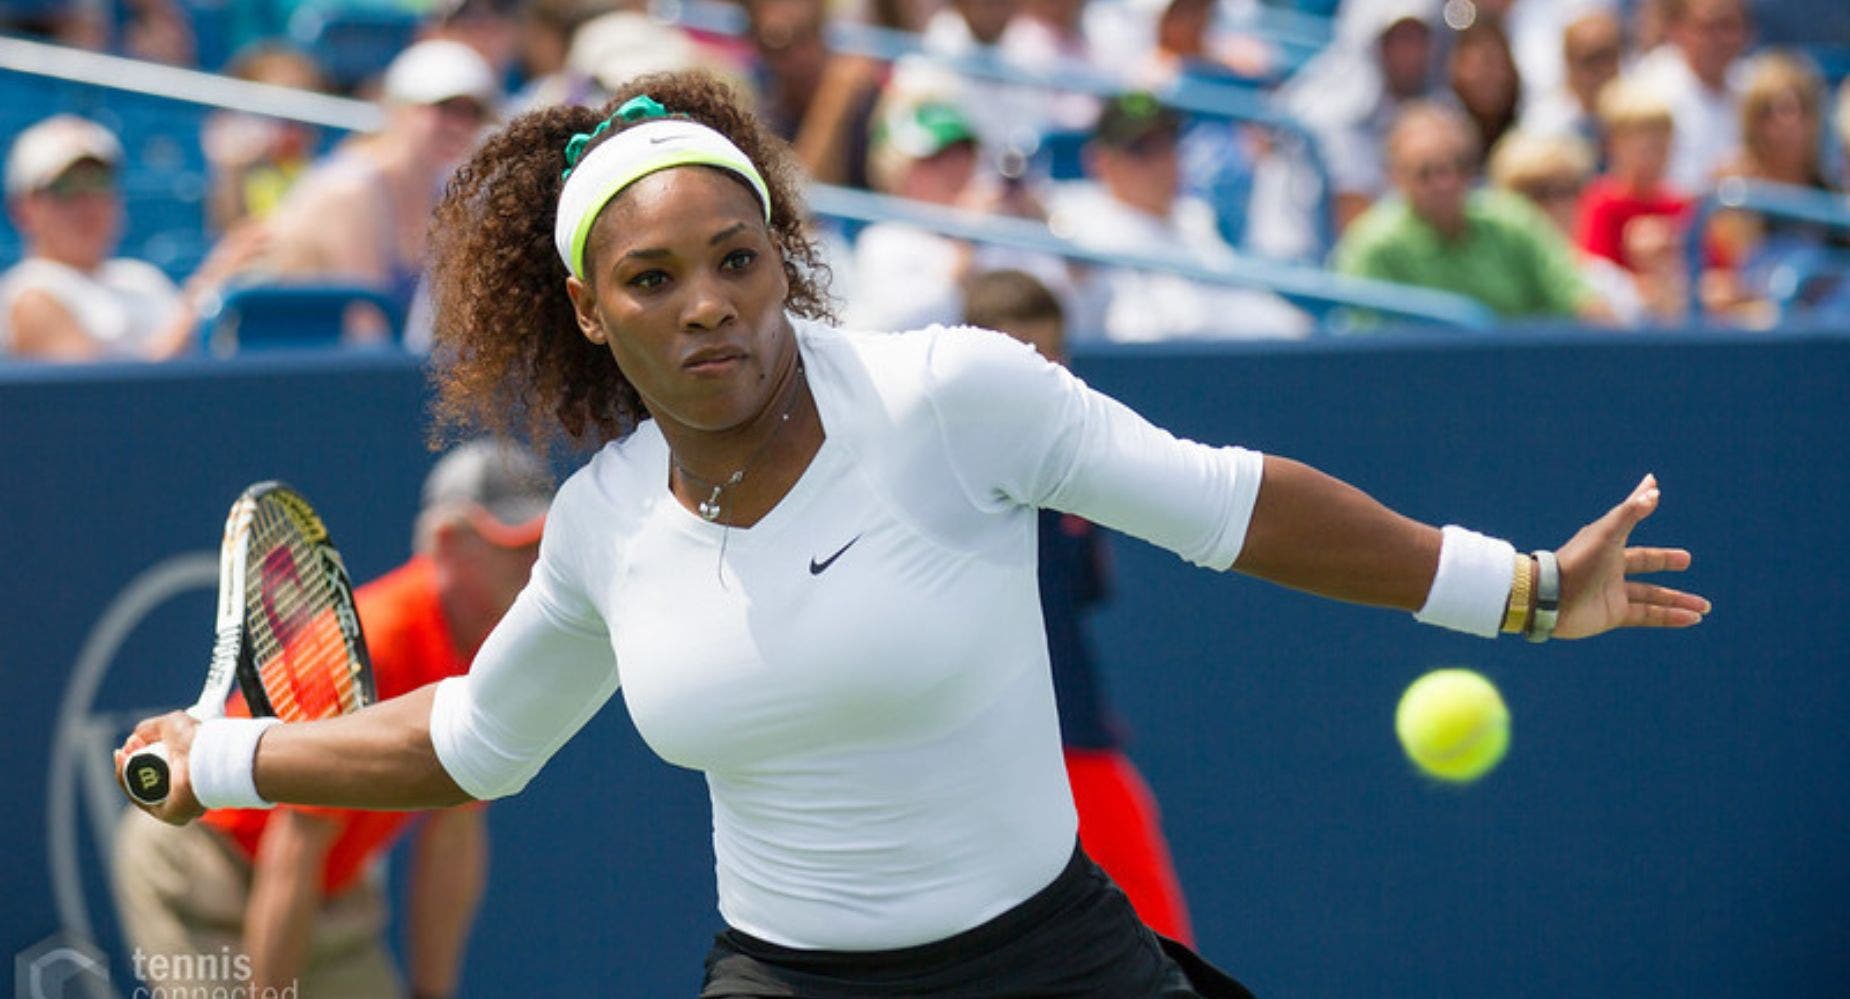 Serena Williams Part Of Crazy Tennis And Baseball Stat: Can She Cap Off Retirement With US Open Win?